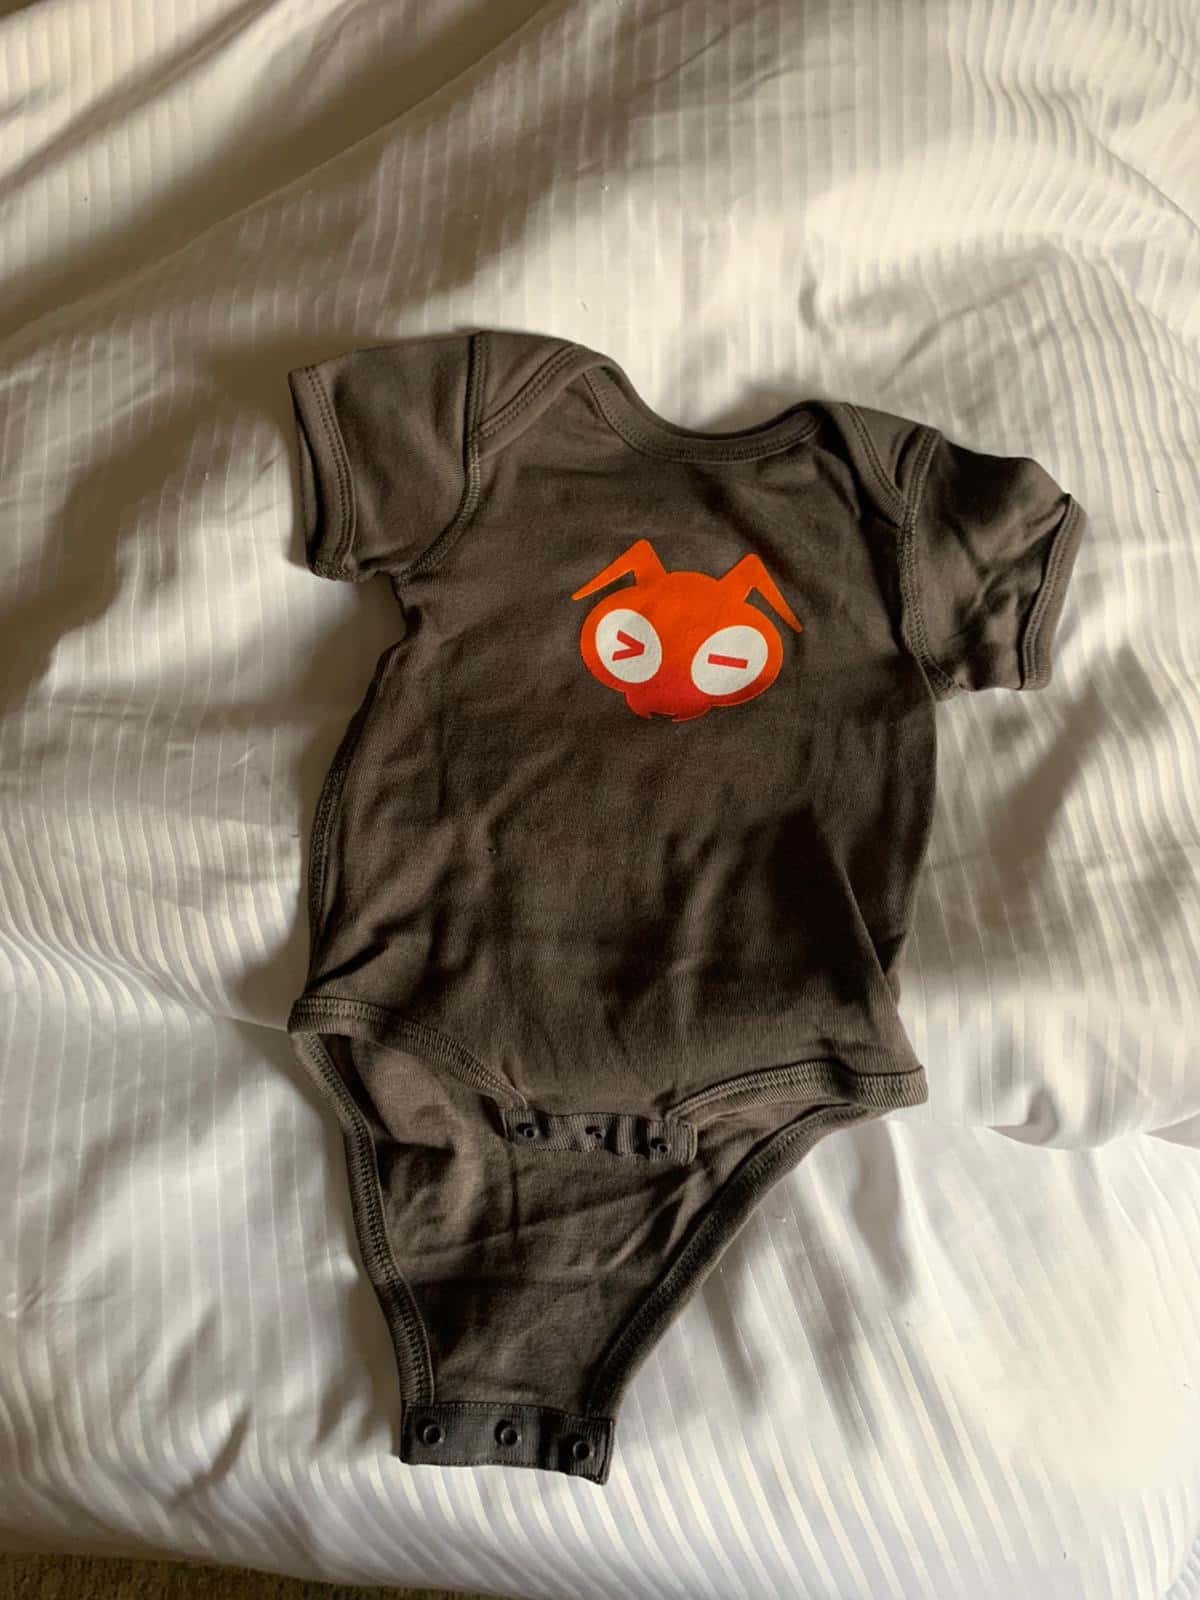 Baby outfit with Giant Swarm logo